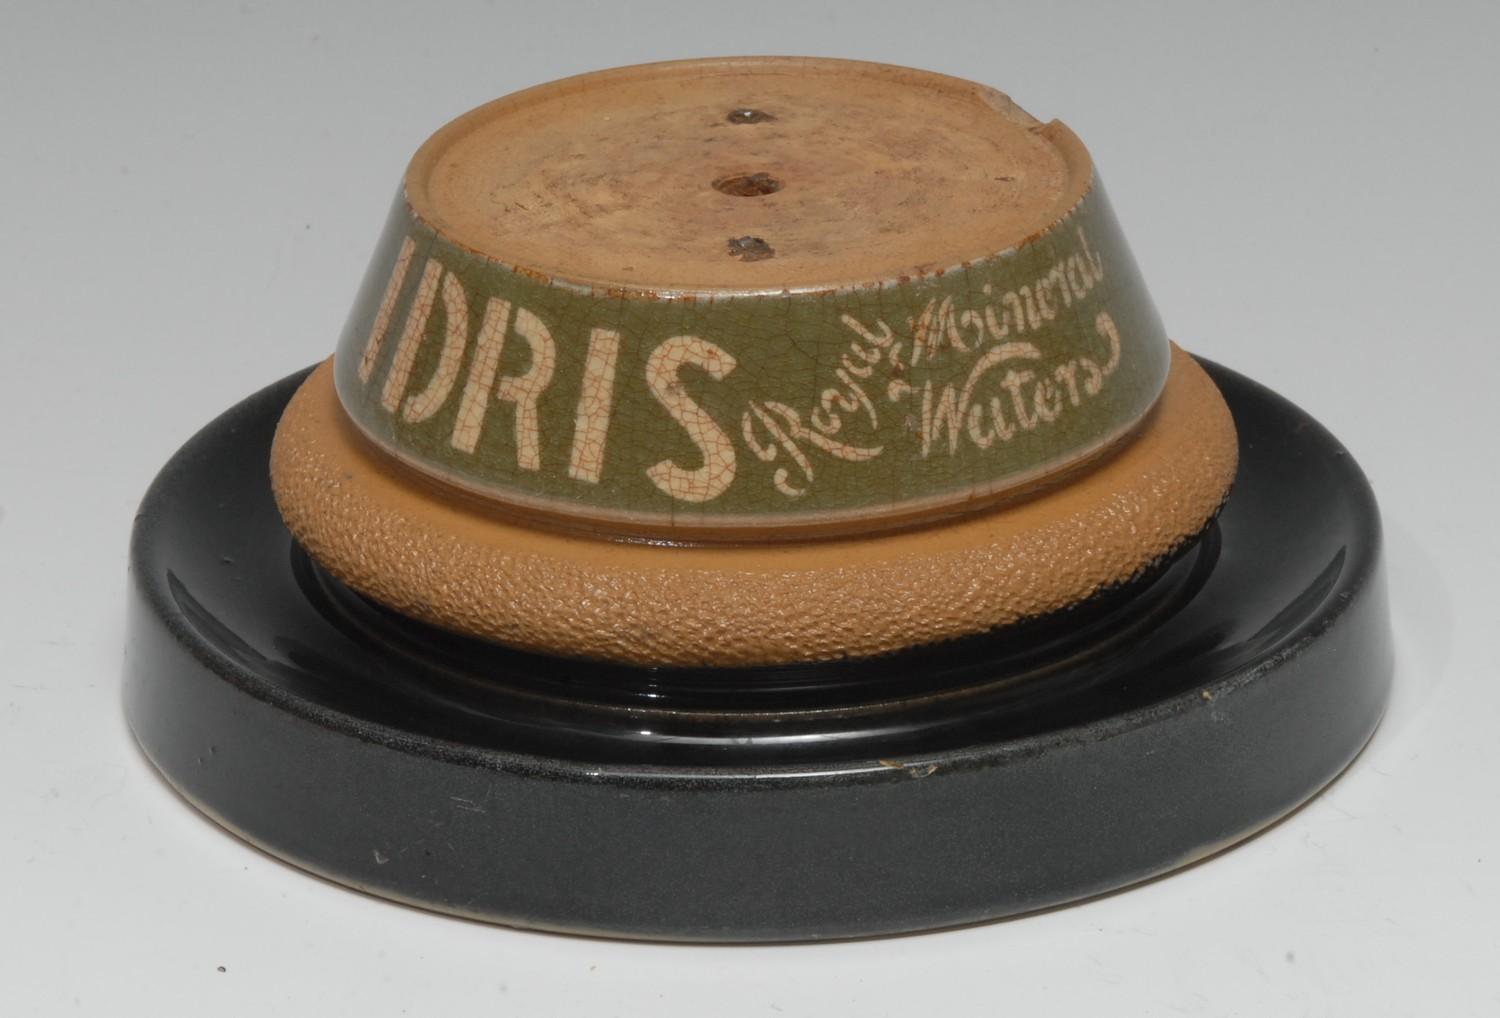 Advertising - a glazed stoneware shop counter top bell stand, Idris Royal Mineral Waters, circular